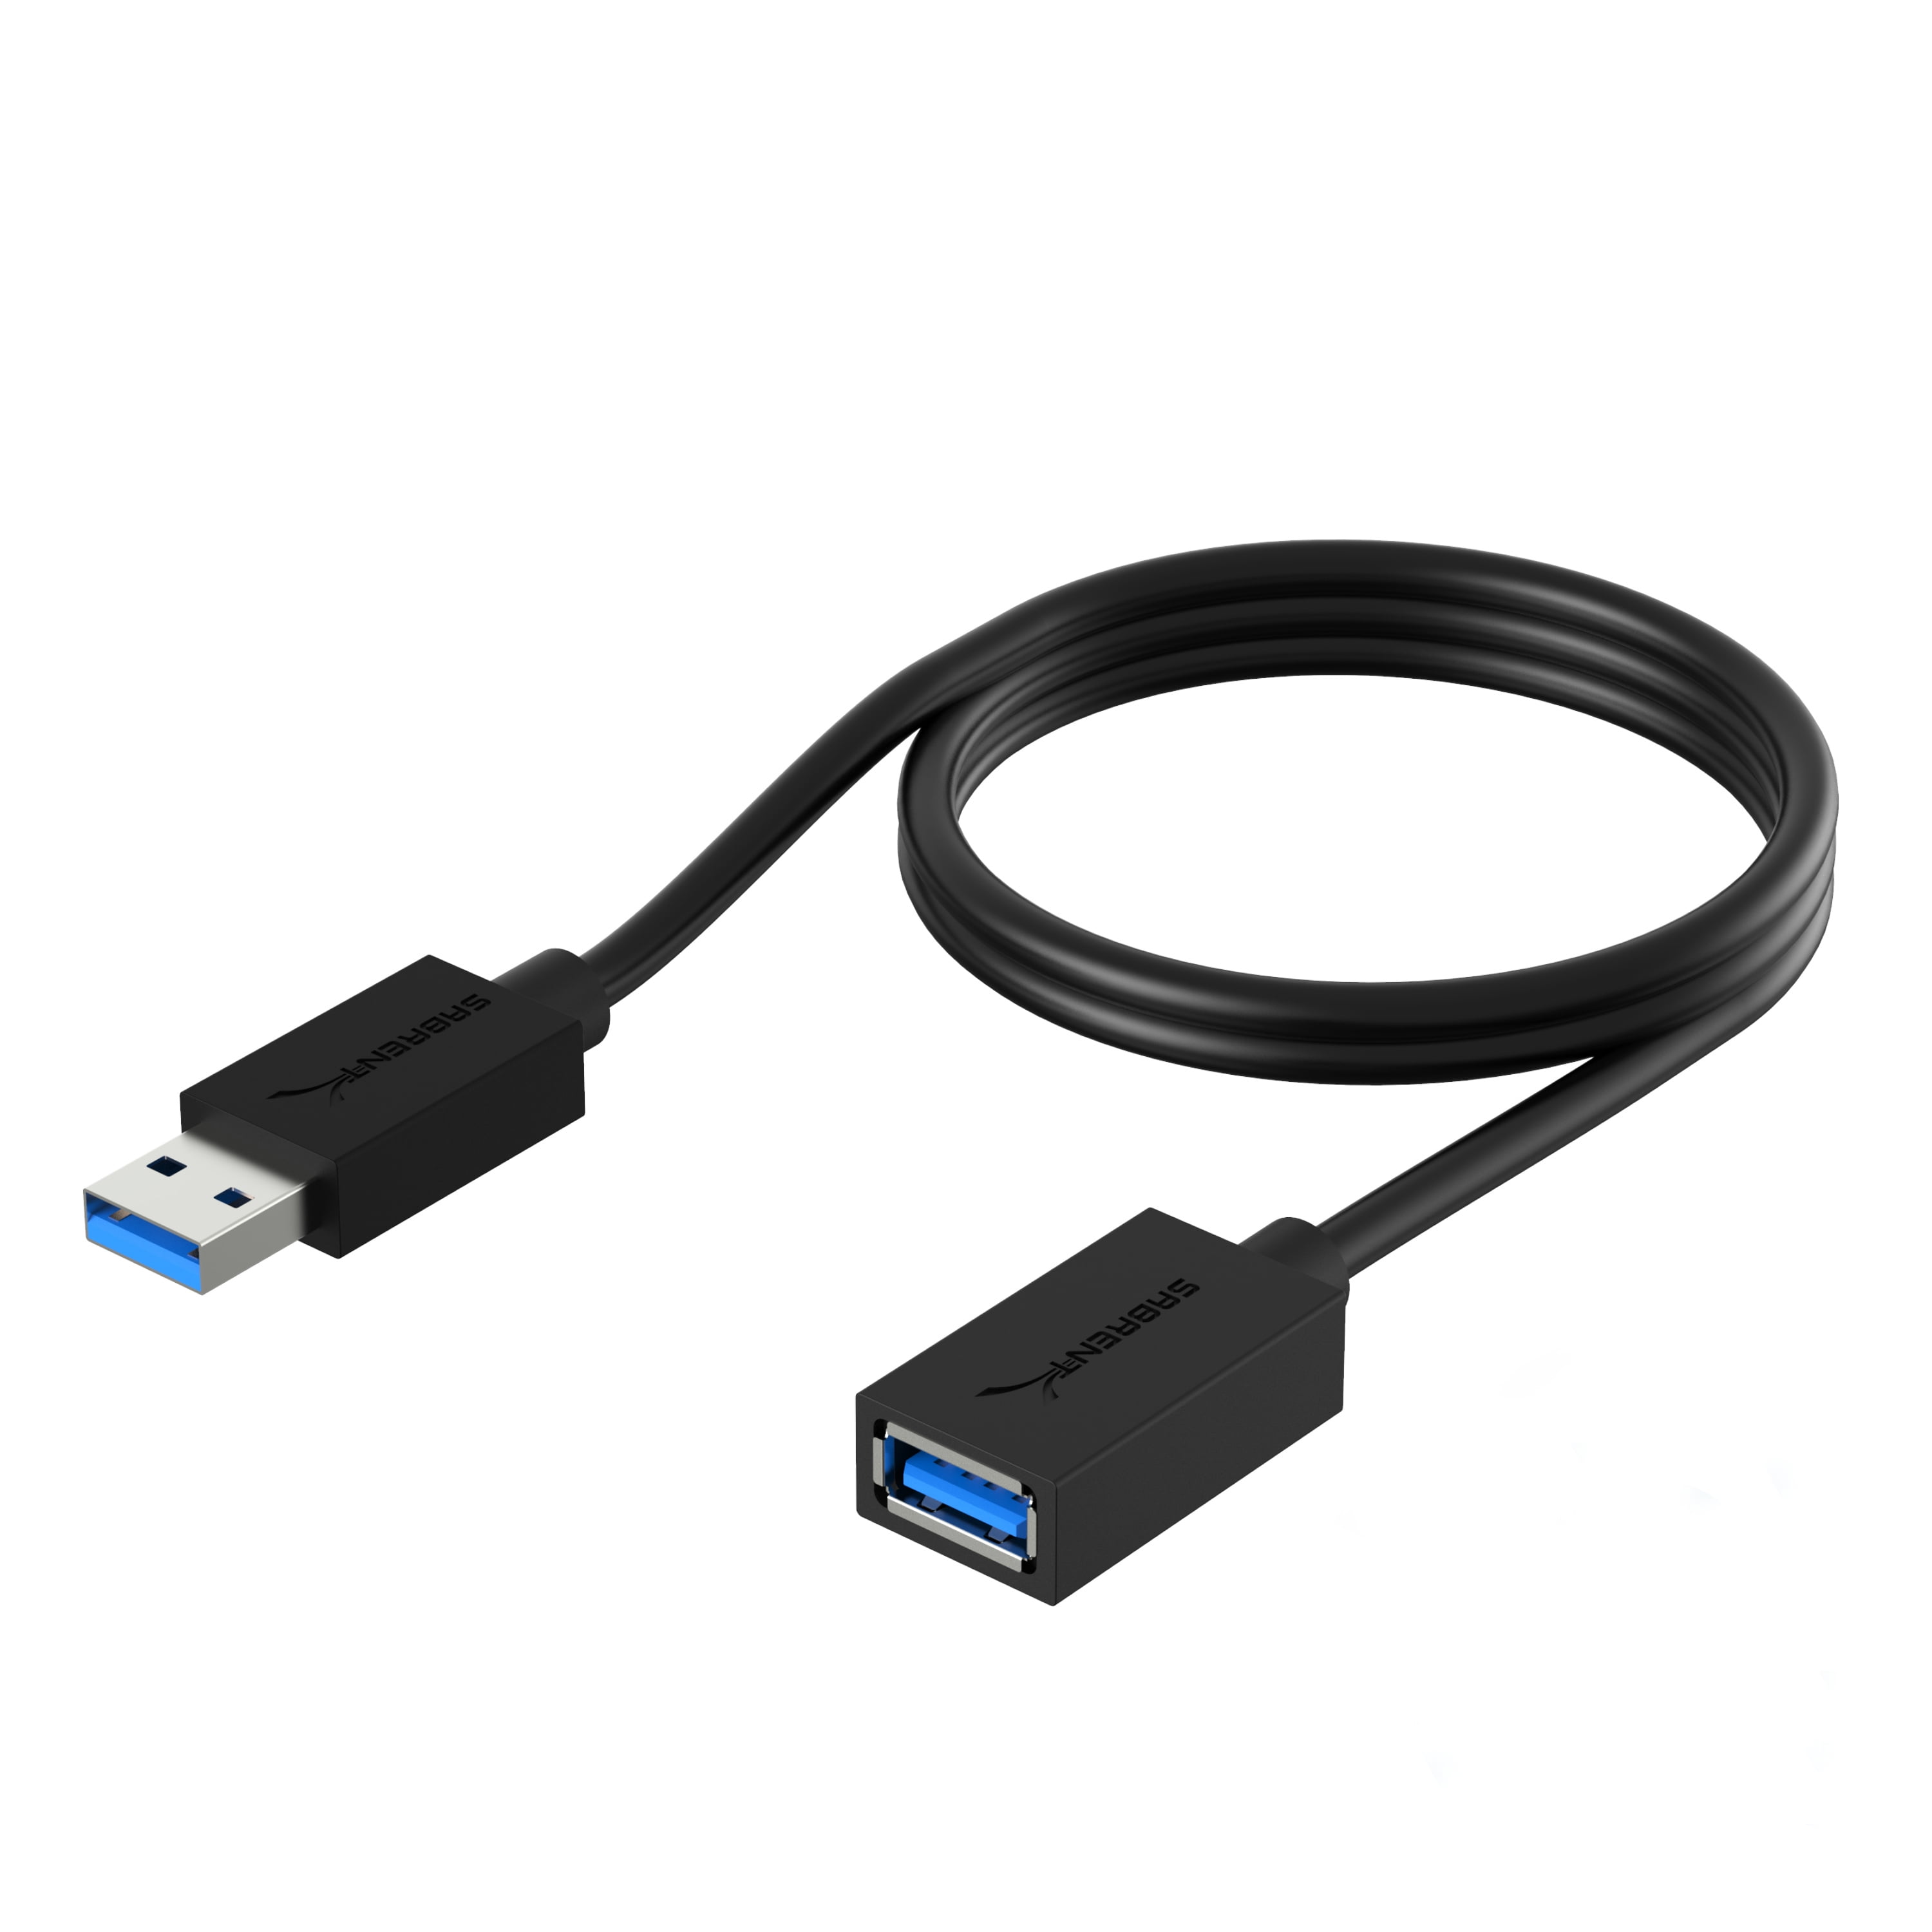 Cable Matters Micro USB 3.0 Cable 6 ft (External Hard Drive Cable, USB to  USB Micro B Cable) in Black, Compatible with Seagate, LaCie, Toshiba